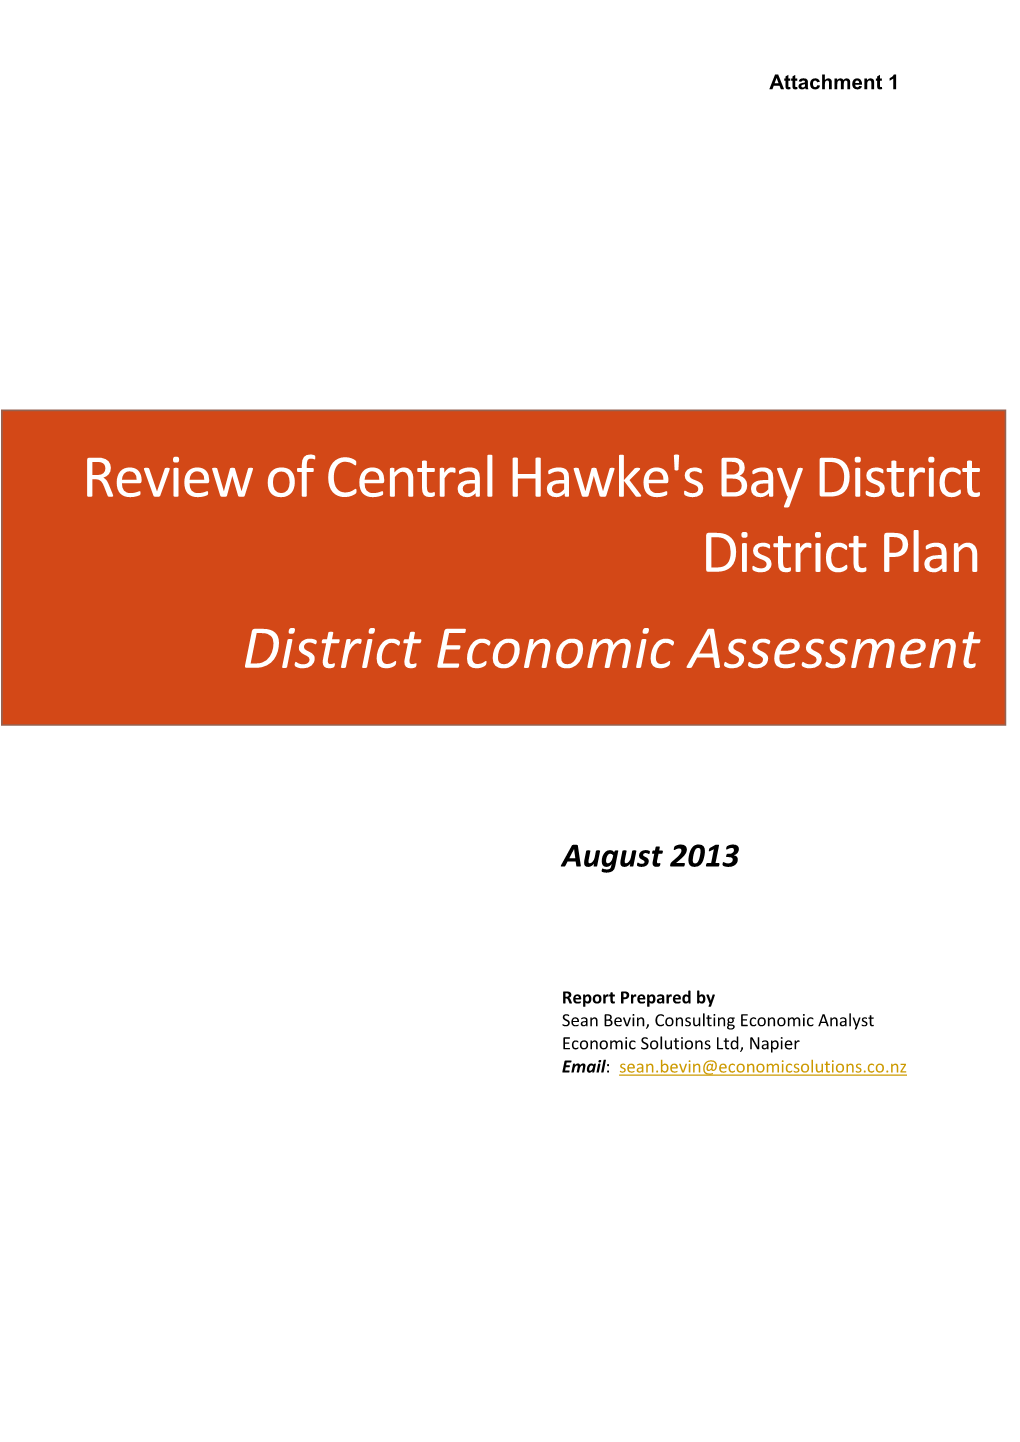 Review of Central Hawke's Bay District District Plan District